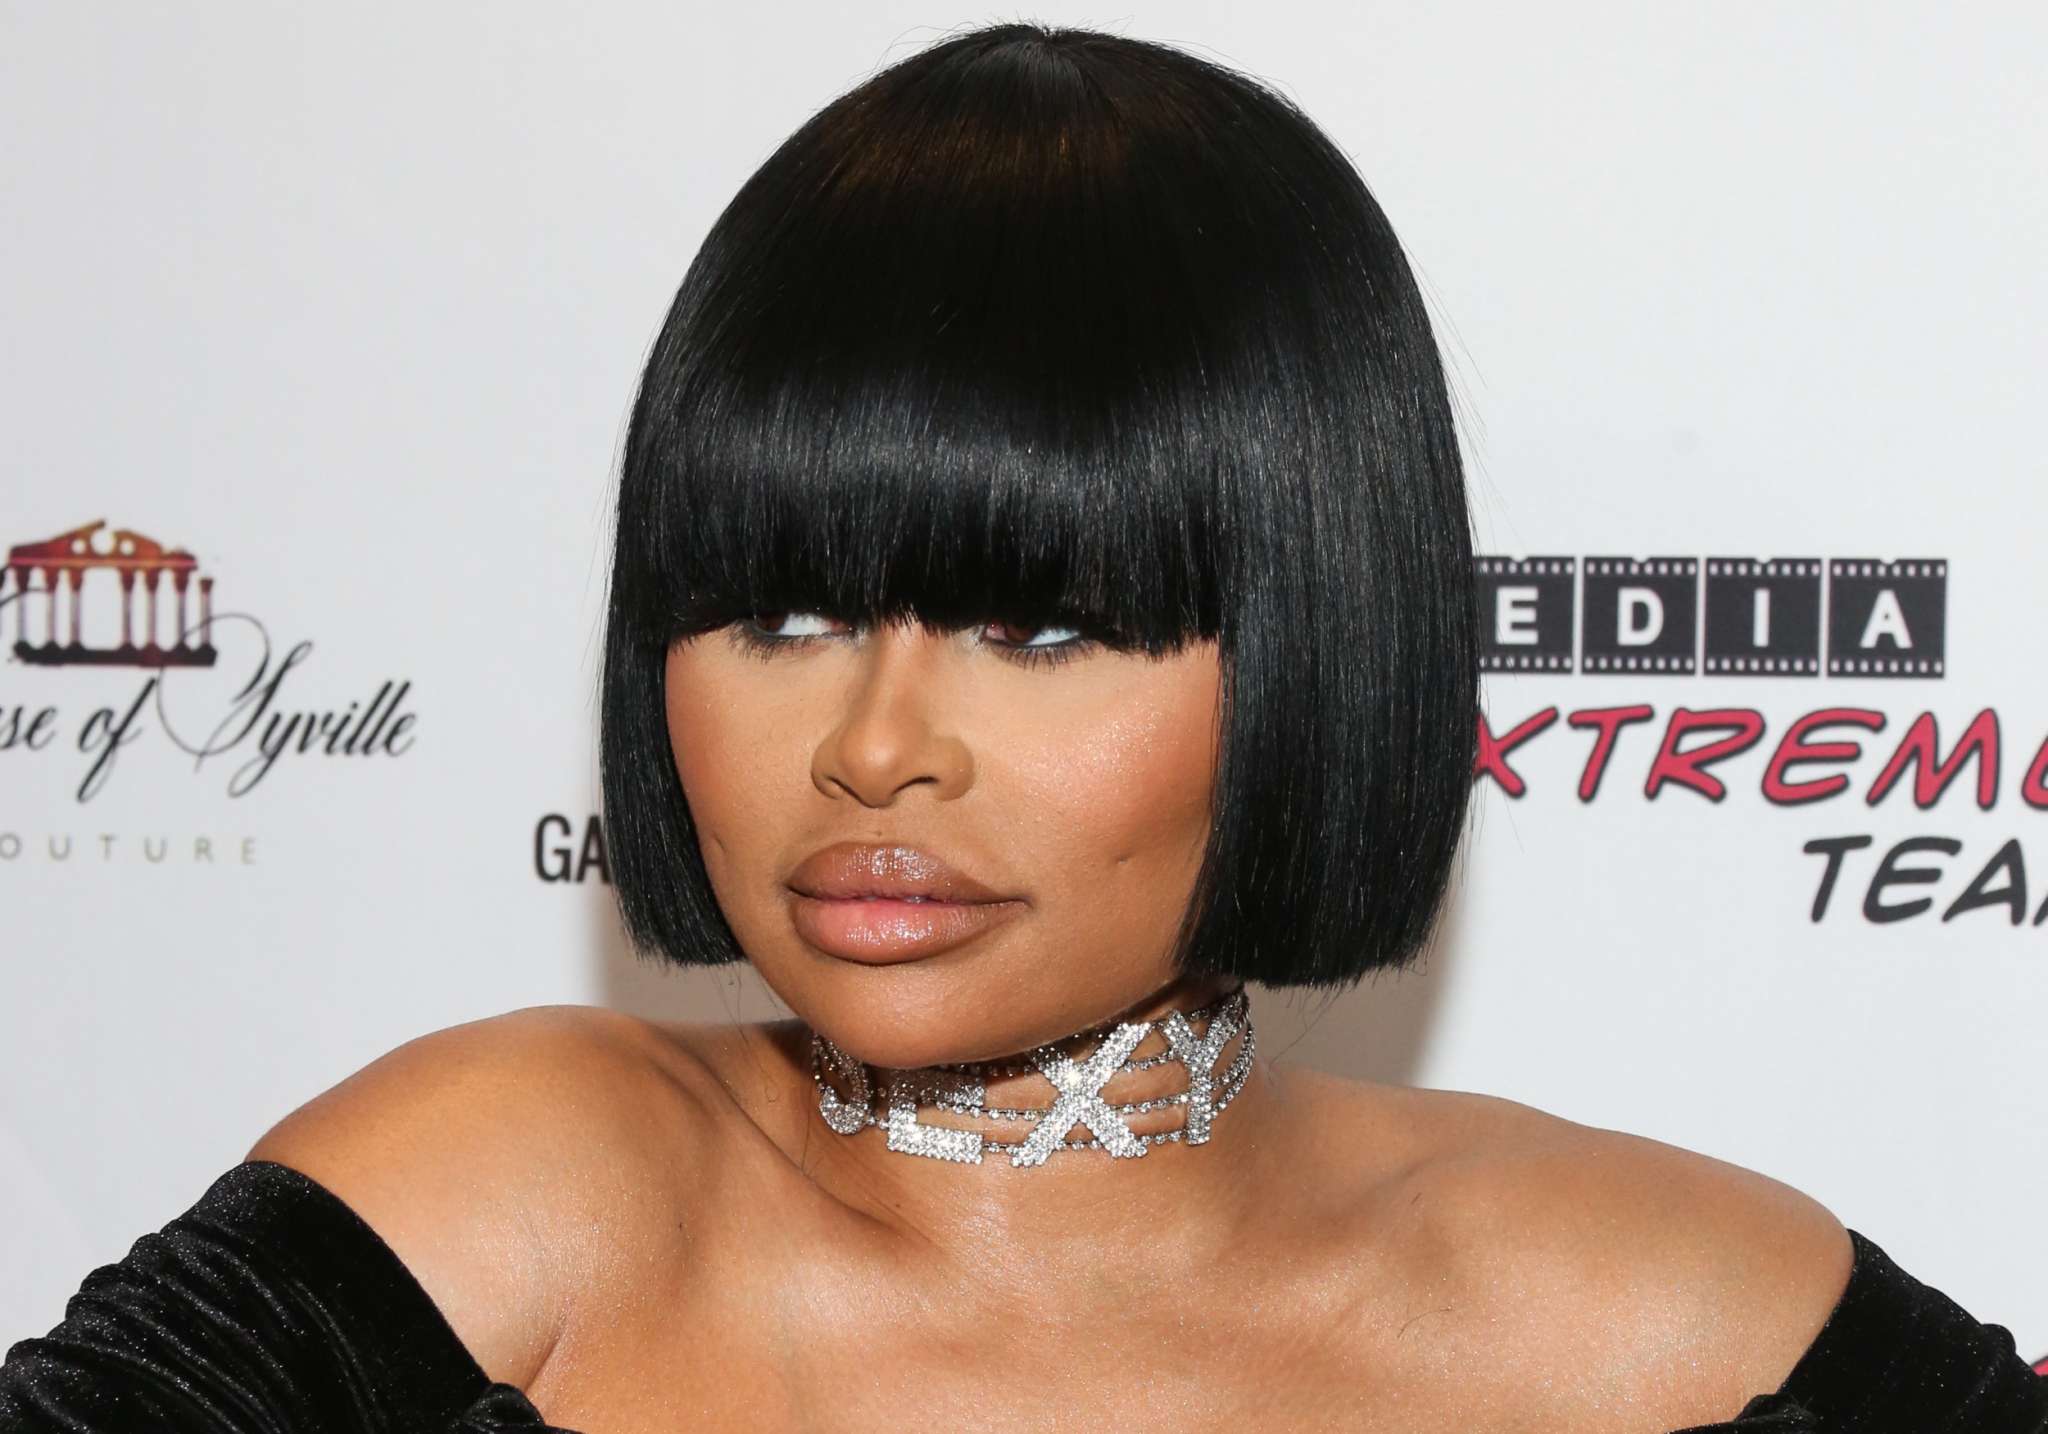 Blac Chyna Is Investigated For Battery - Here Are The Official Details